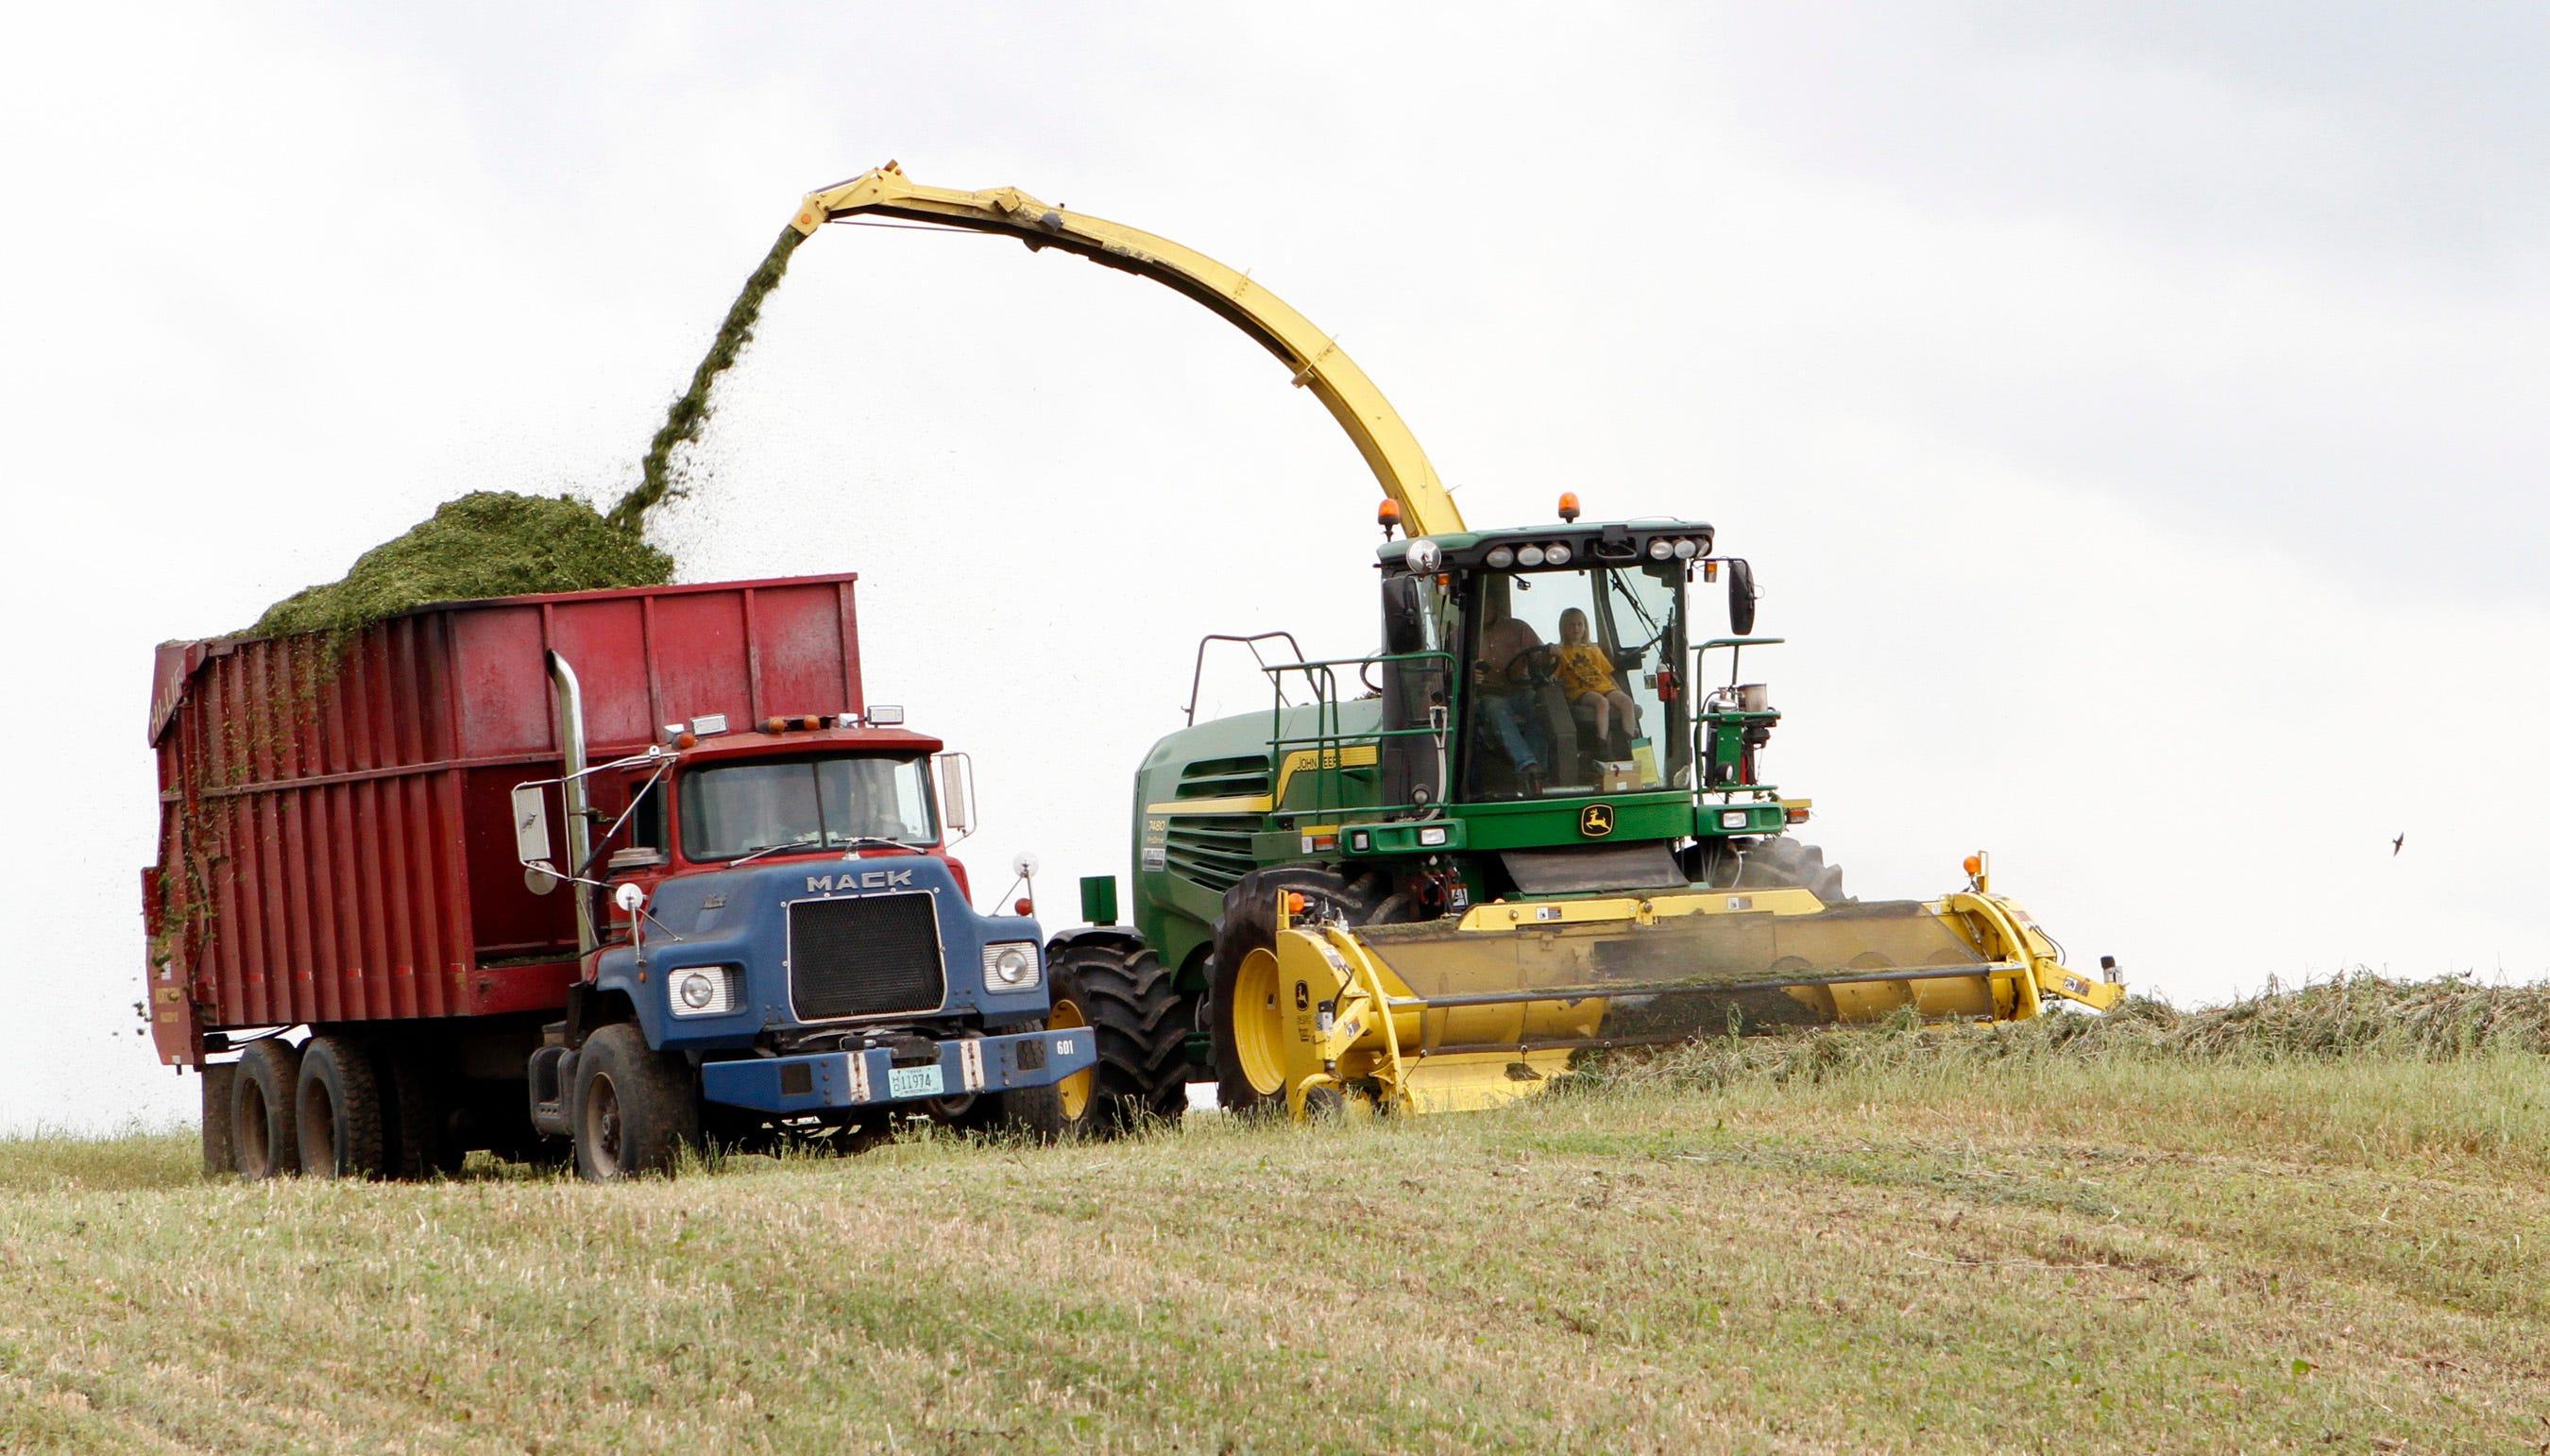 A Washington County alfalfa field is cleared as hay is chopped into a truck. Fourth crop alfalfa in northern Wisconsin was short due to a lack of rain.